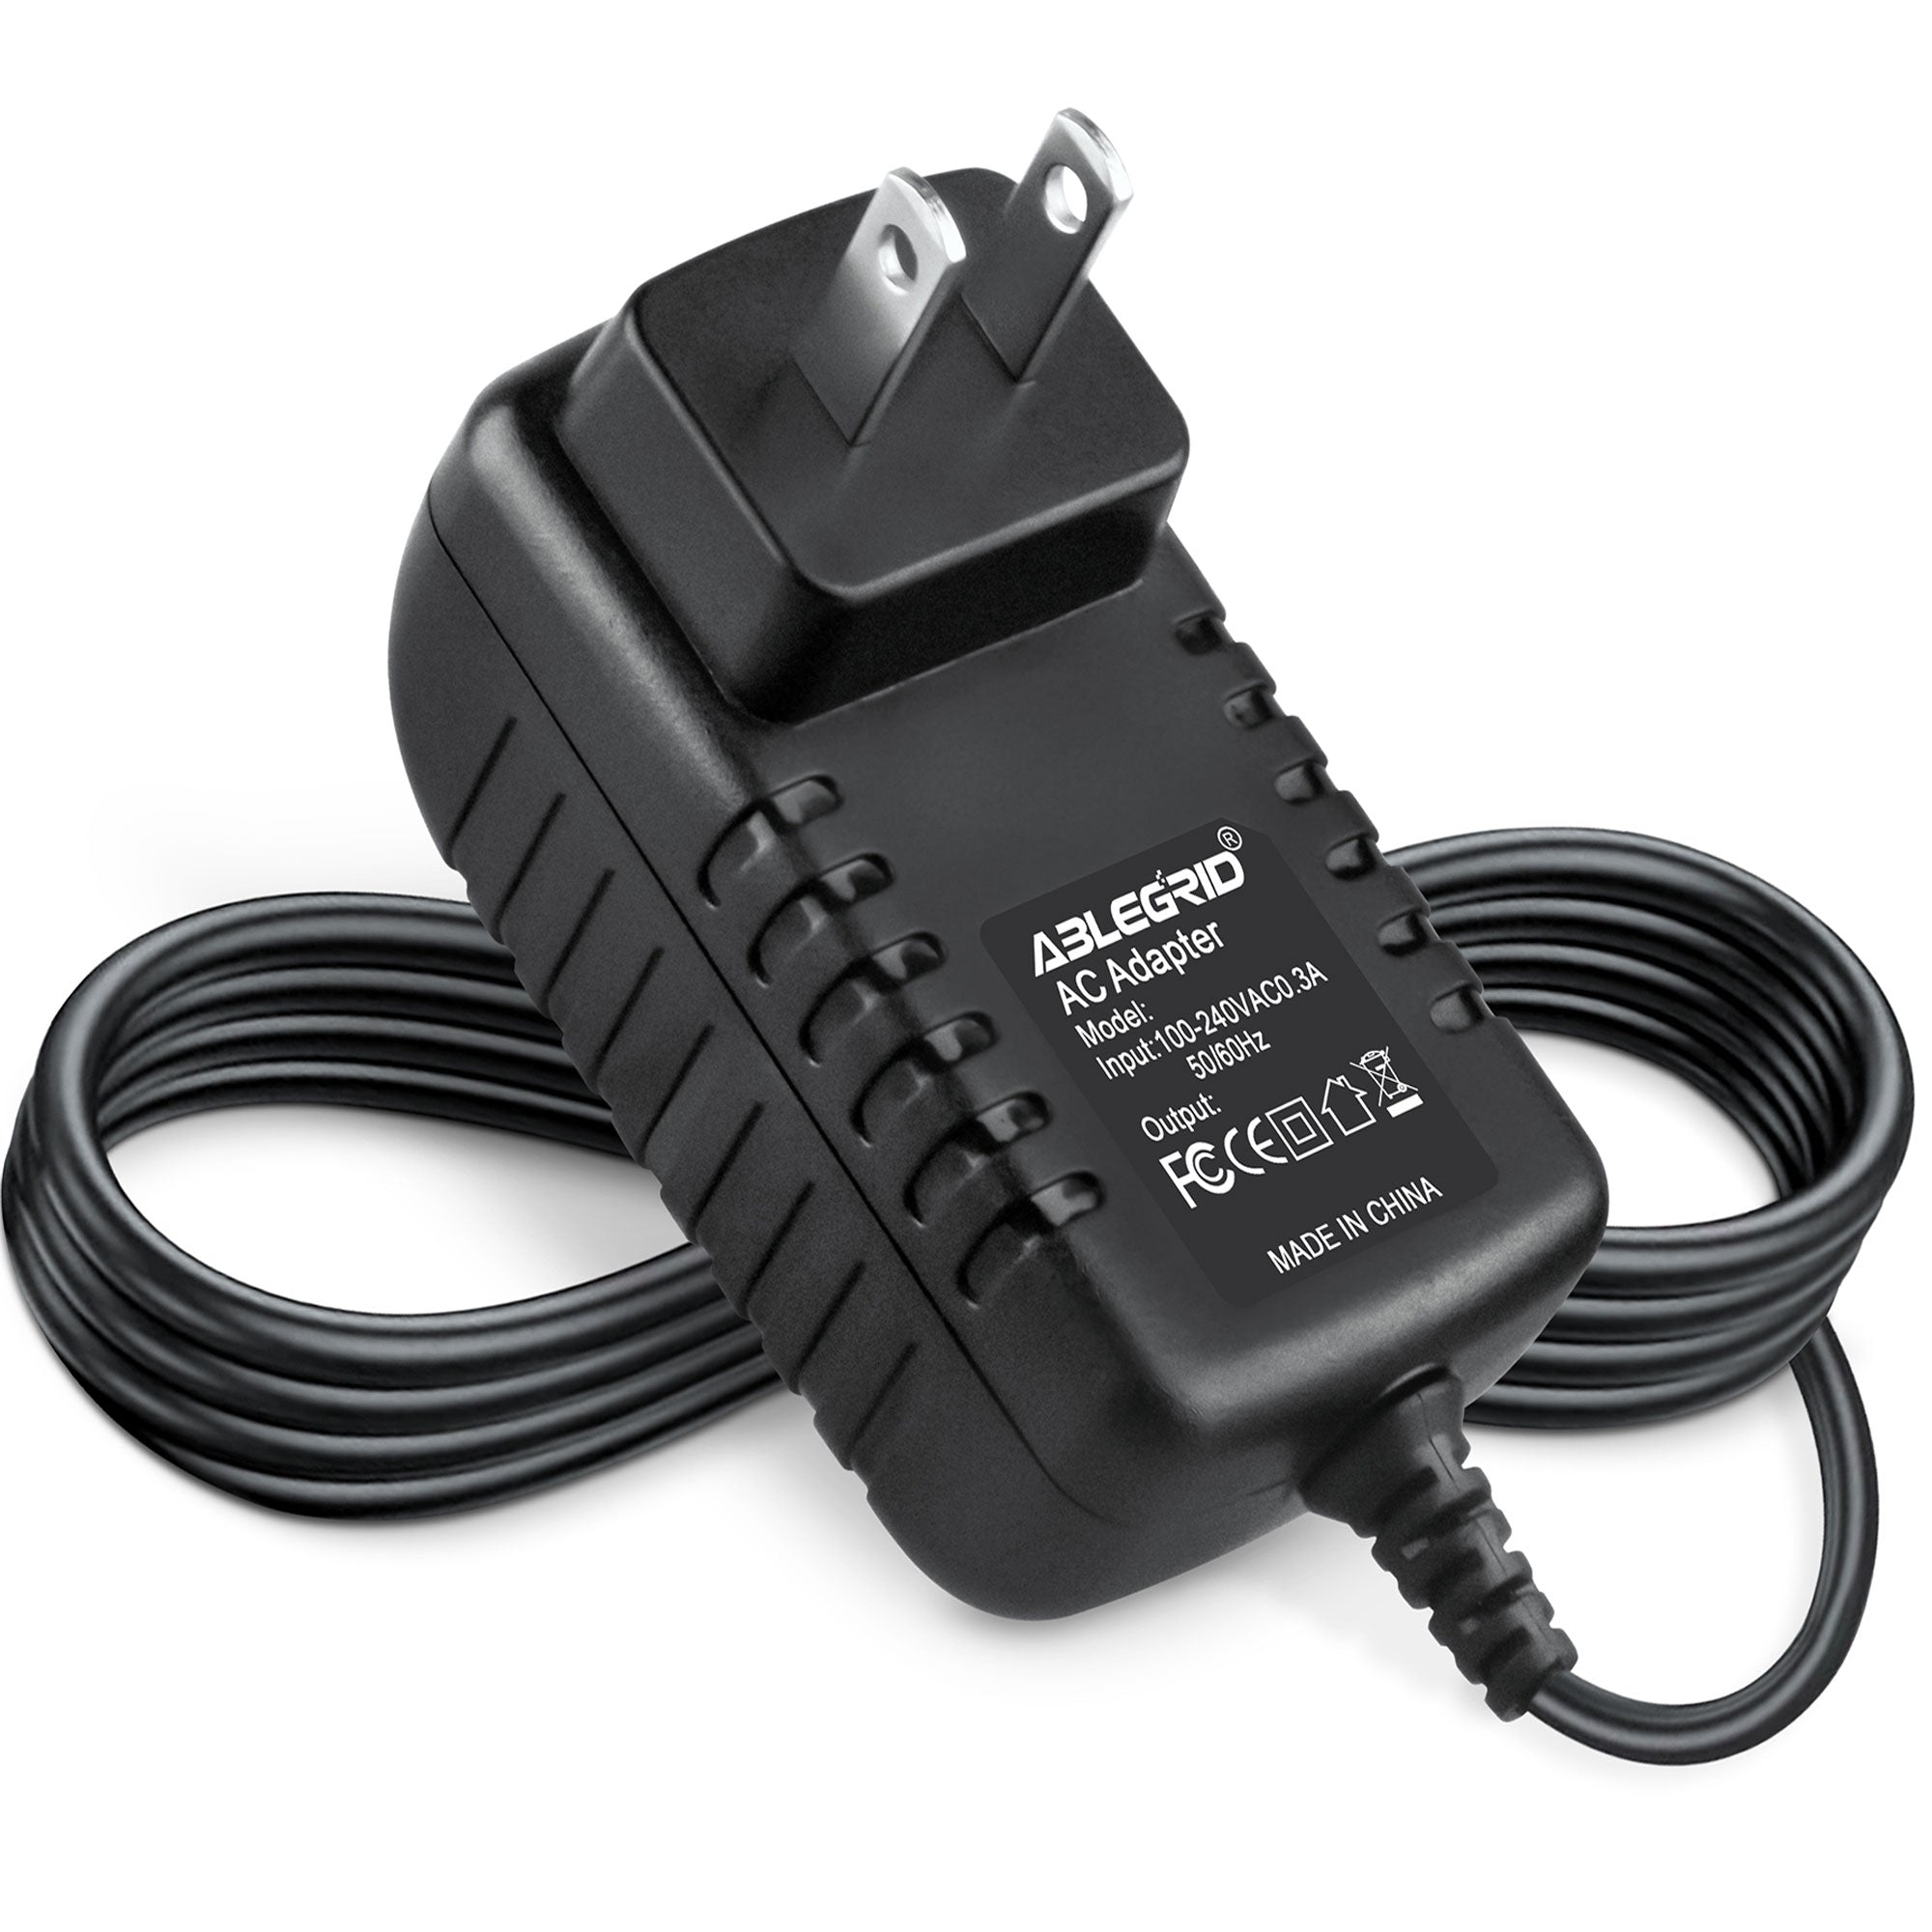 AbleGrid AC-DC Adapter for Marpac Marsona Model: SP41-120500 SP41120500 Class 2 Transformer Power Supply Cord Cable PS Wall Home Battery Charger Input: 100 - 240 VAC 50/60Hz Worldwide Voltage Use Mains PSU